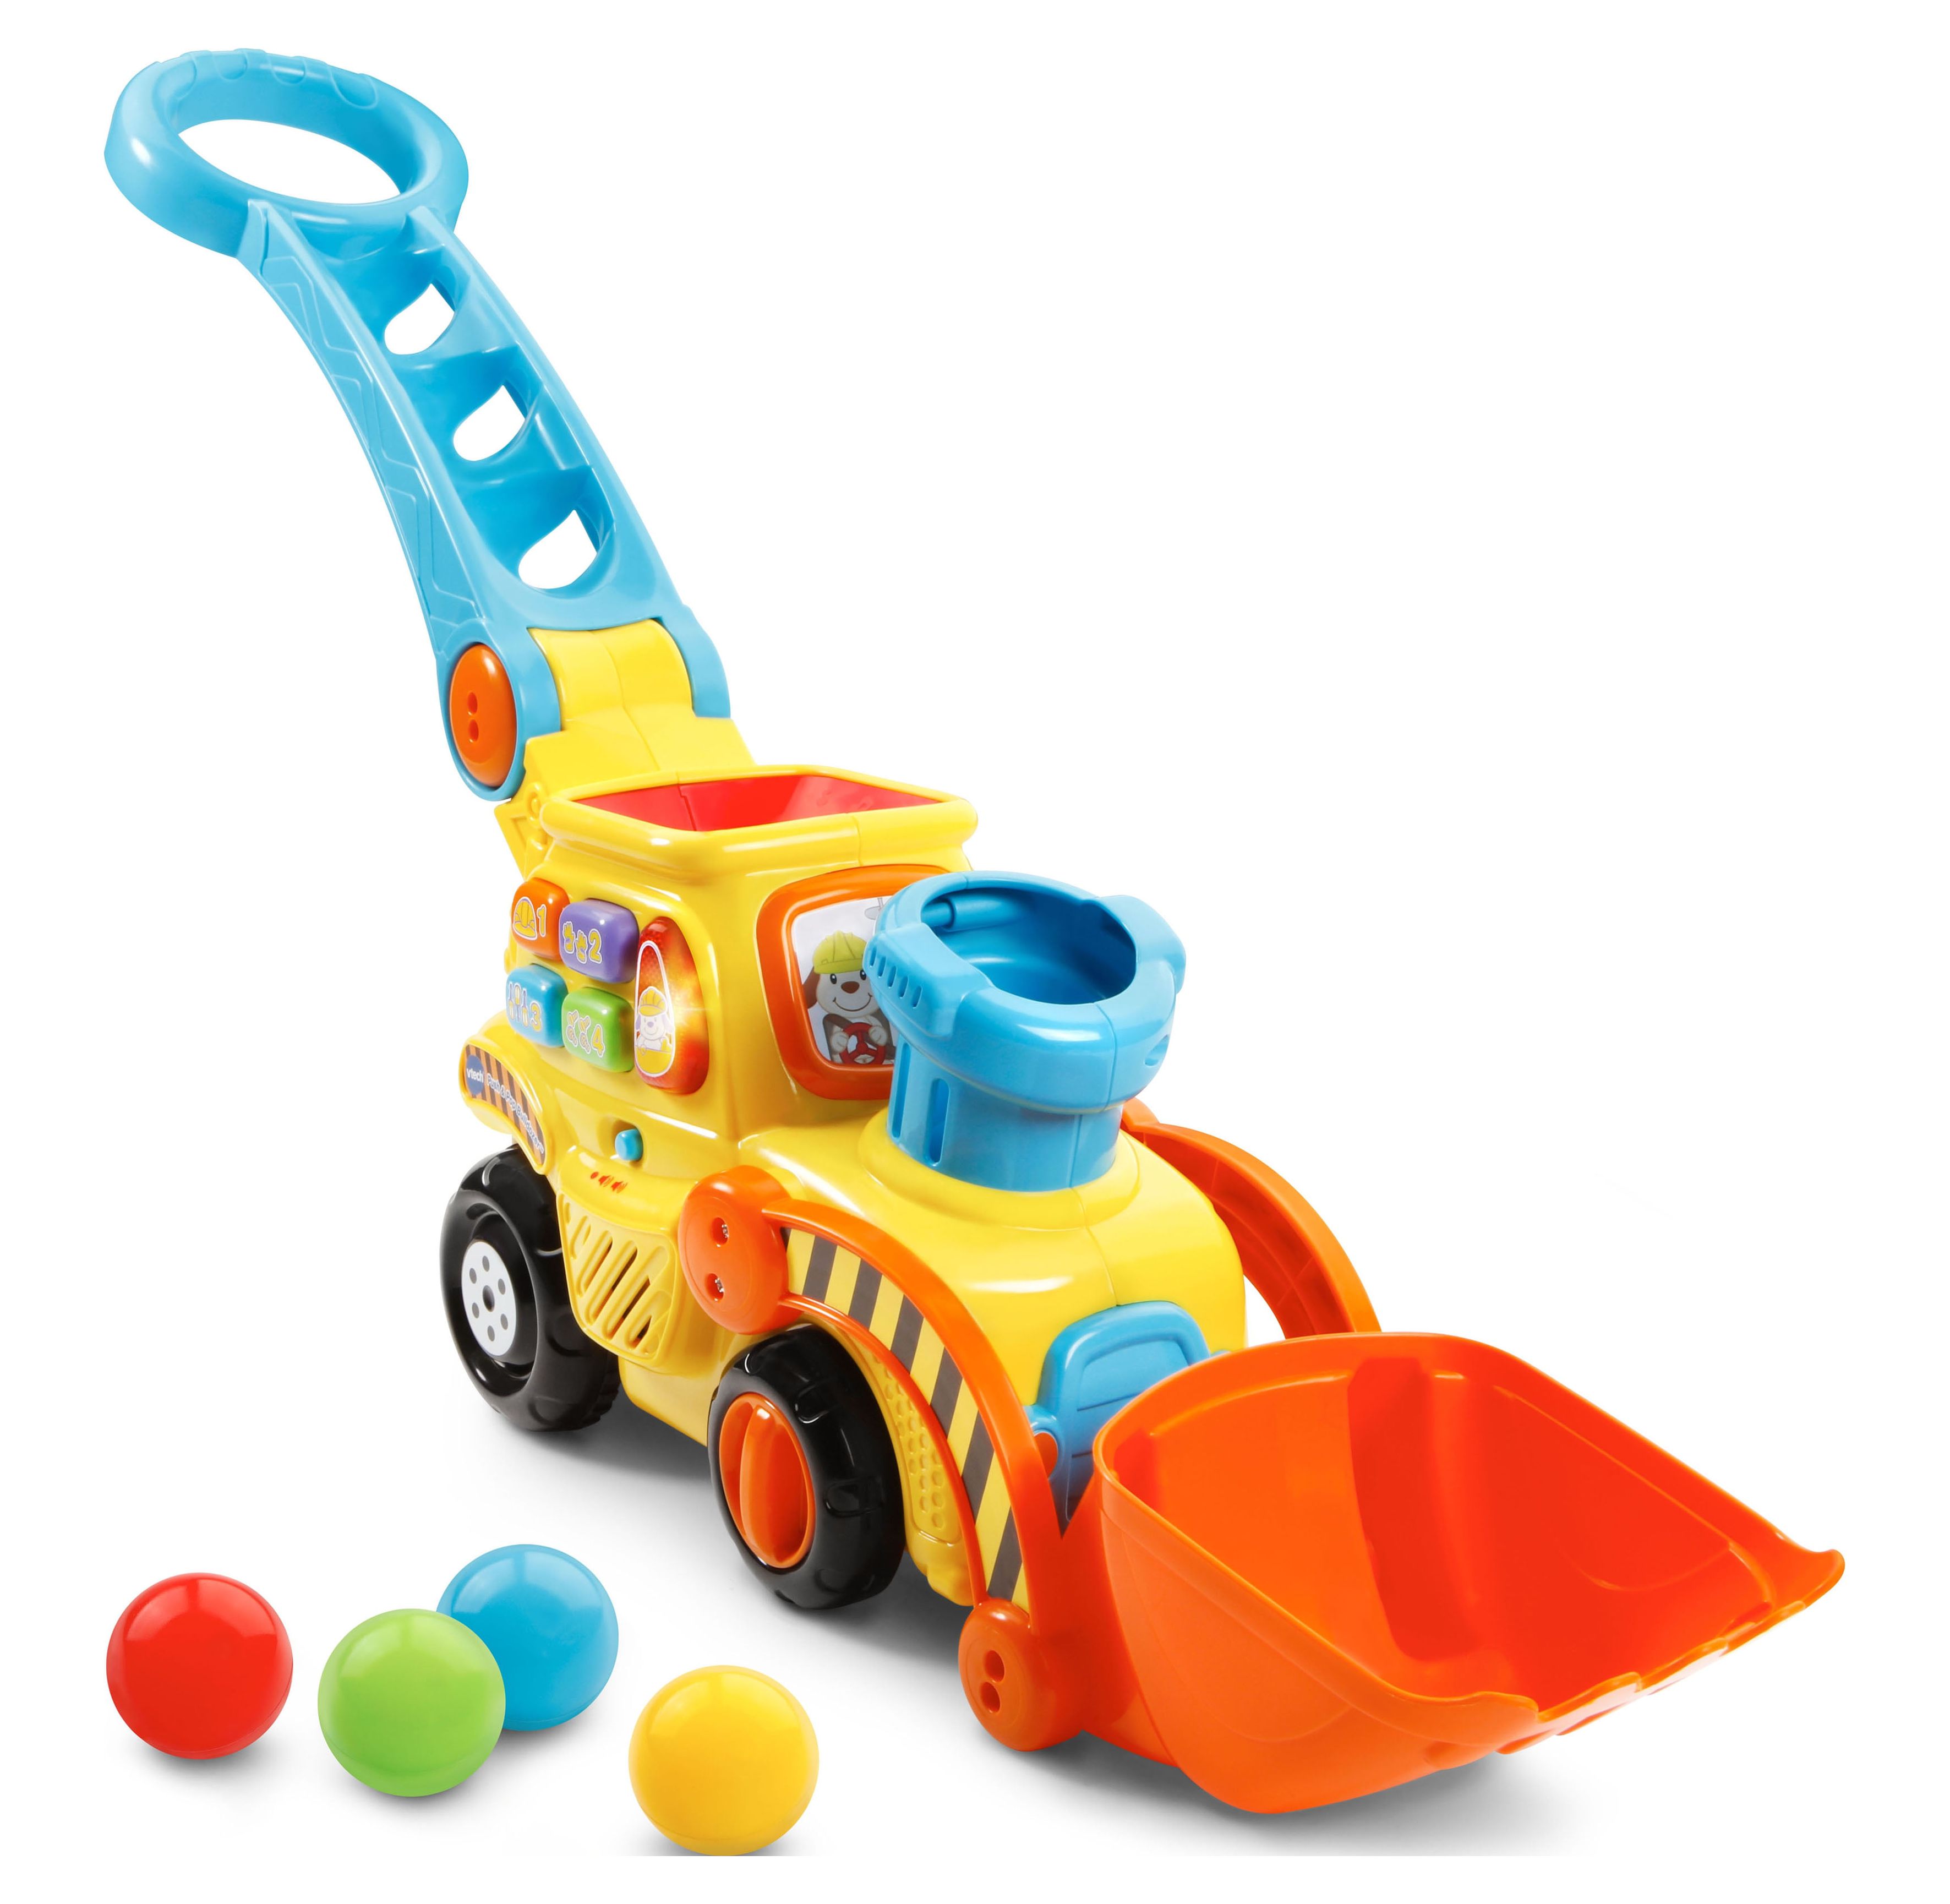 VTech, Pop-a-Balls, Push and Pop Bulldozer, Toddler Learning Toy - image 4 of 12